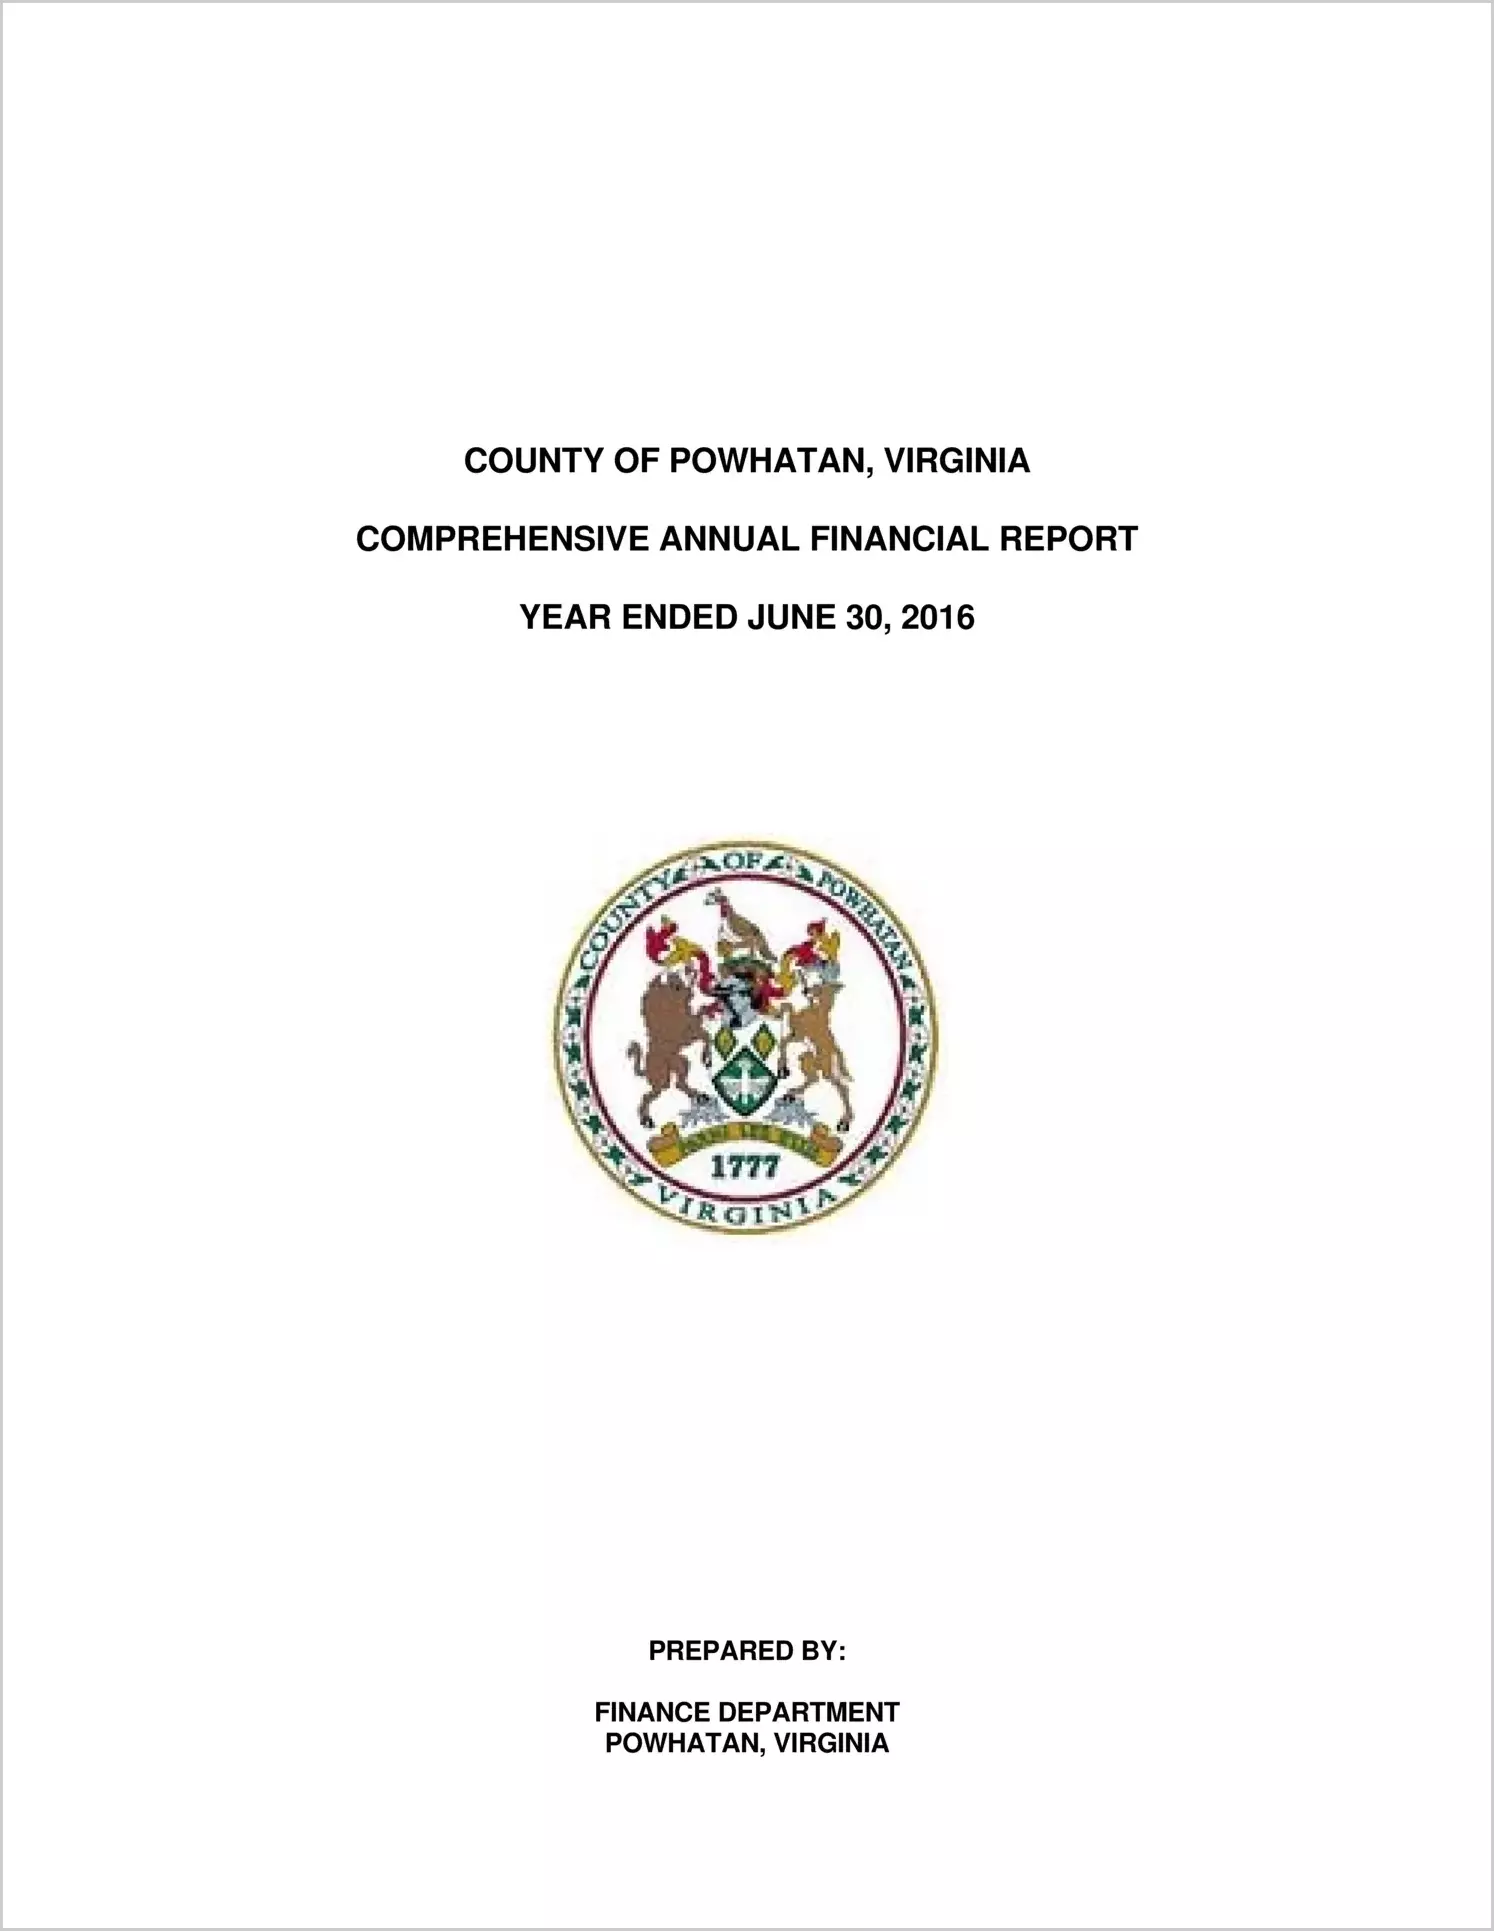 2016 Annual Financial Report for County of Powhatan